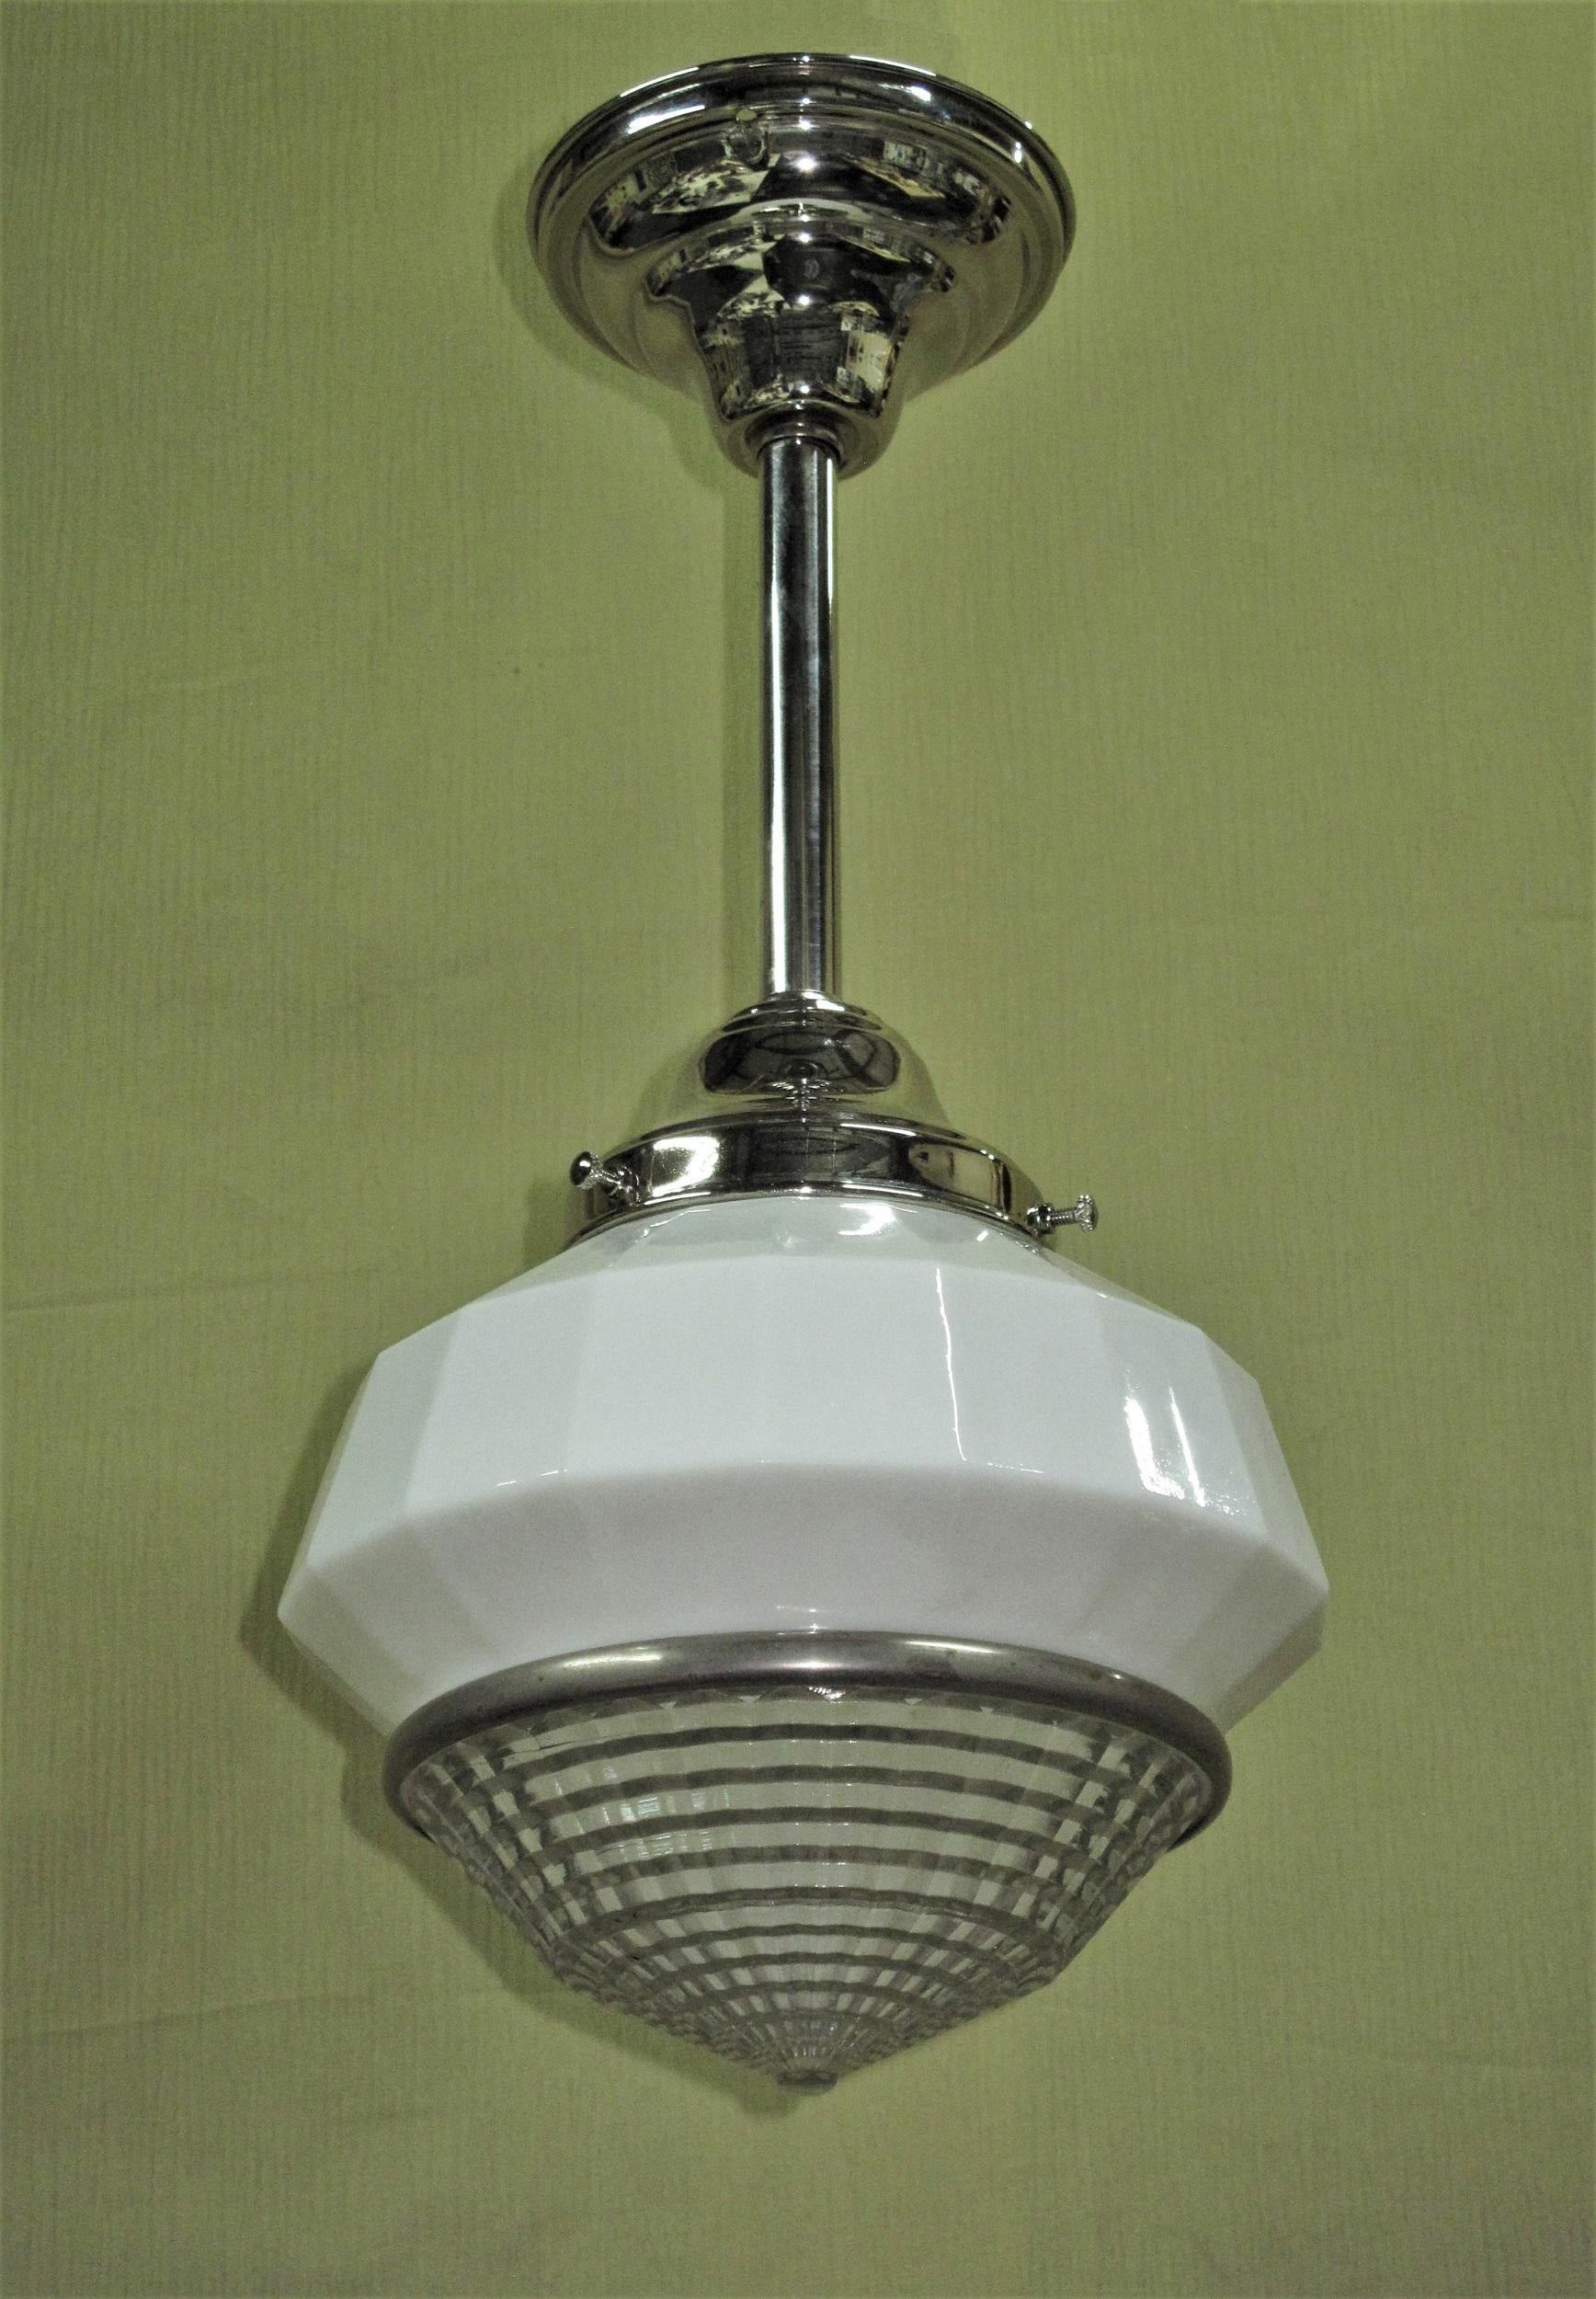 On the smaller size as far as the schoolhouse style of lighting goes, but just the right size for a smaller kitchen light fixture or a couple of nice pendants in the bathroom.
Priced each and both match. Patent number on the metal ring dates these